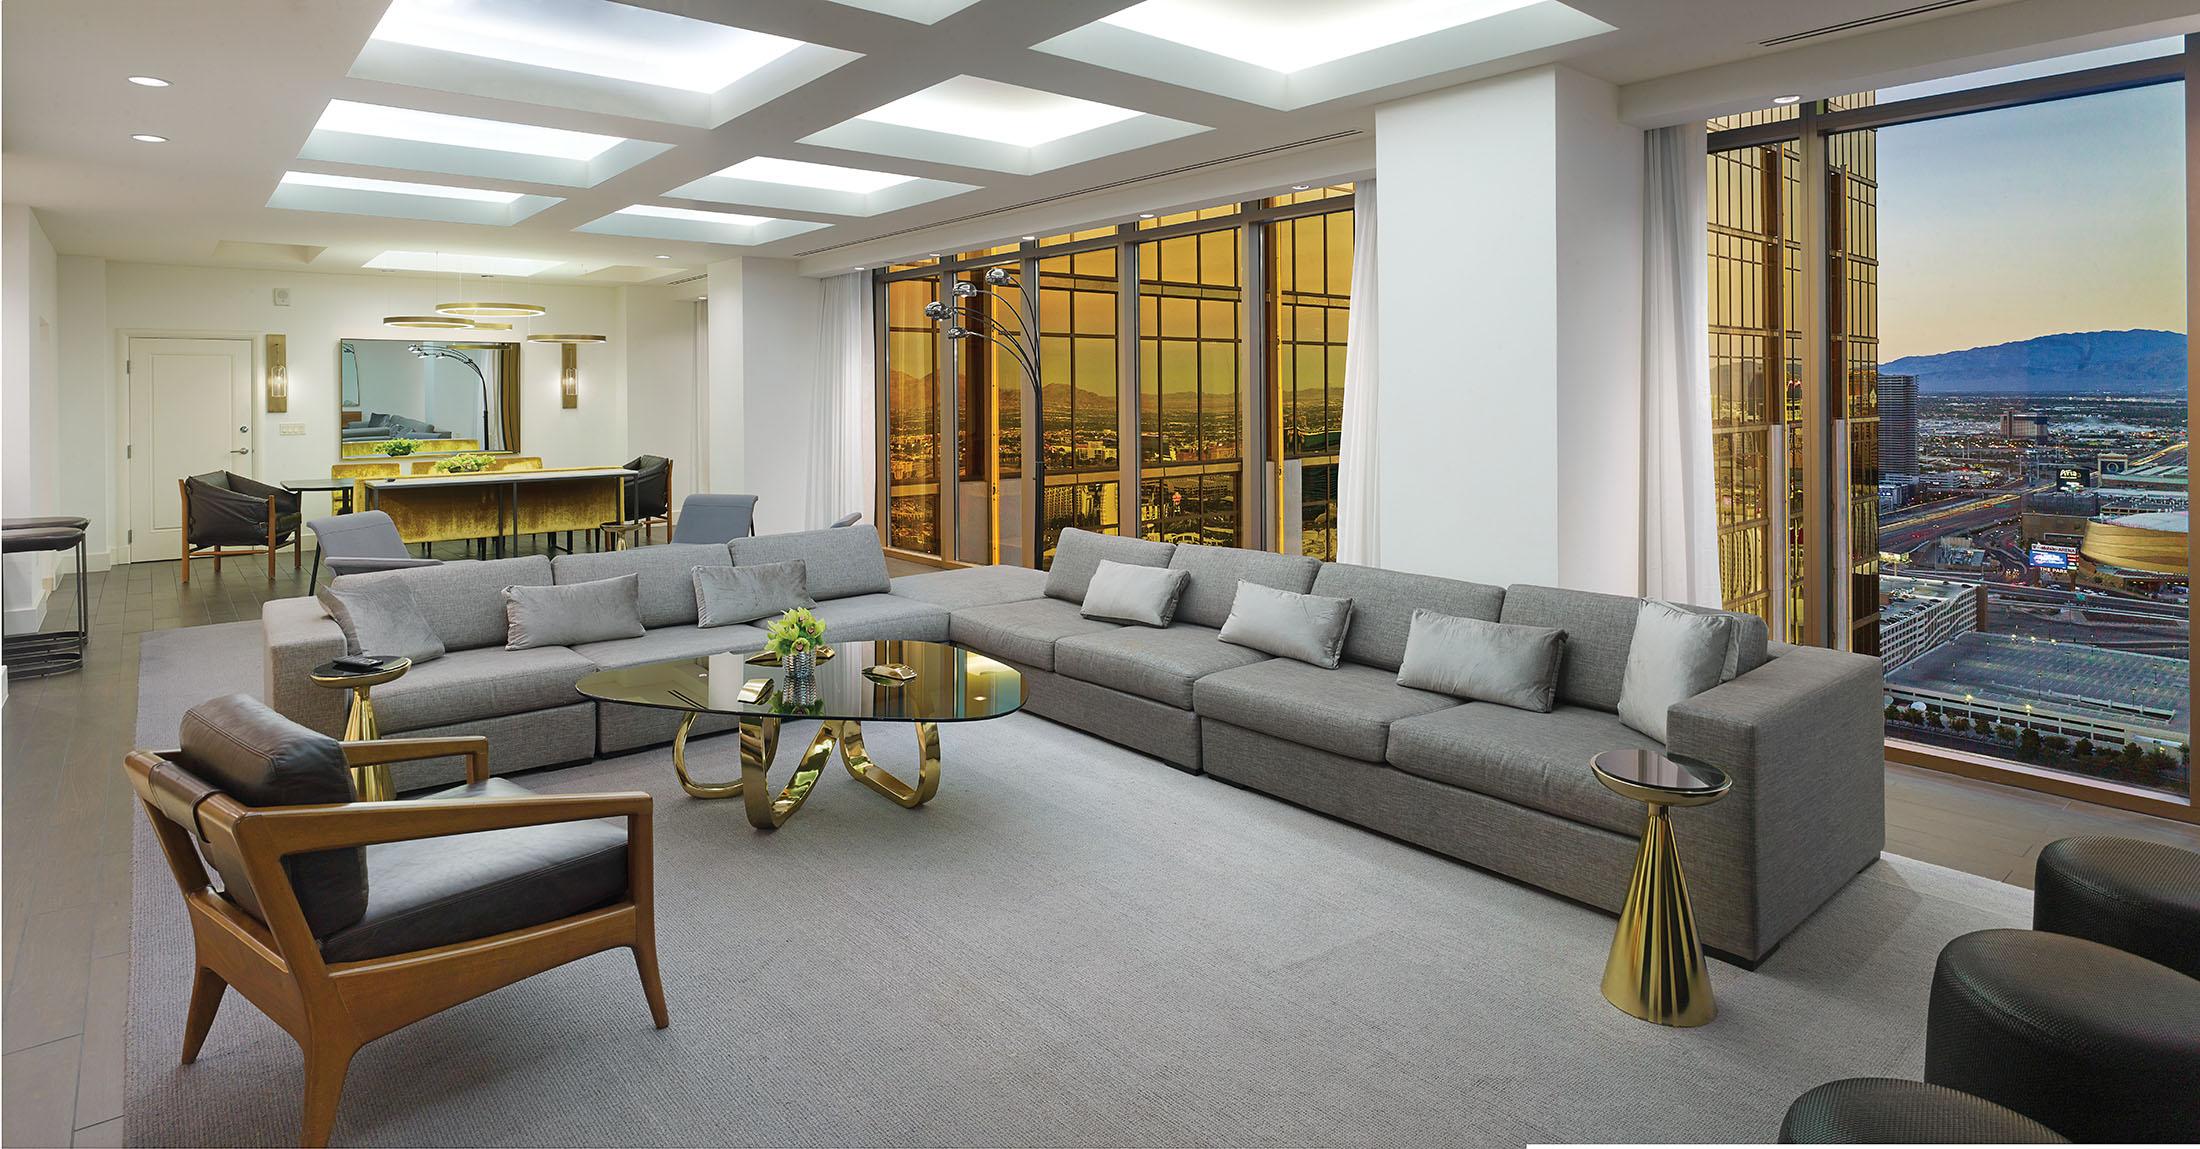 Grey sofas in large living room with view of Las Vegas strip